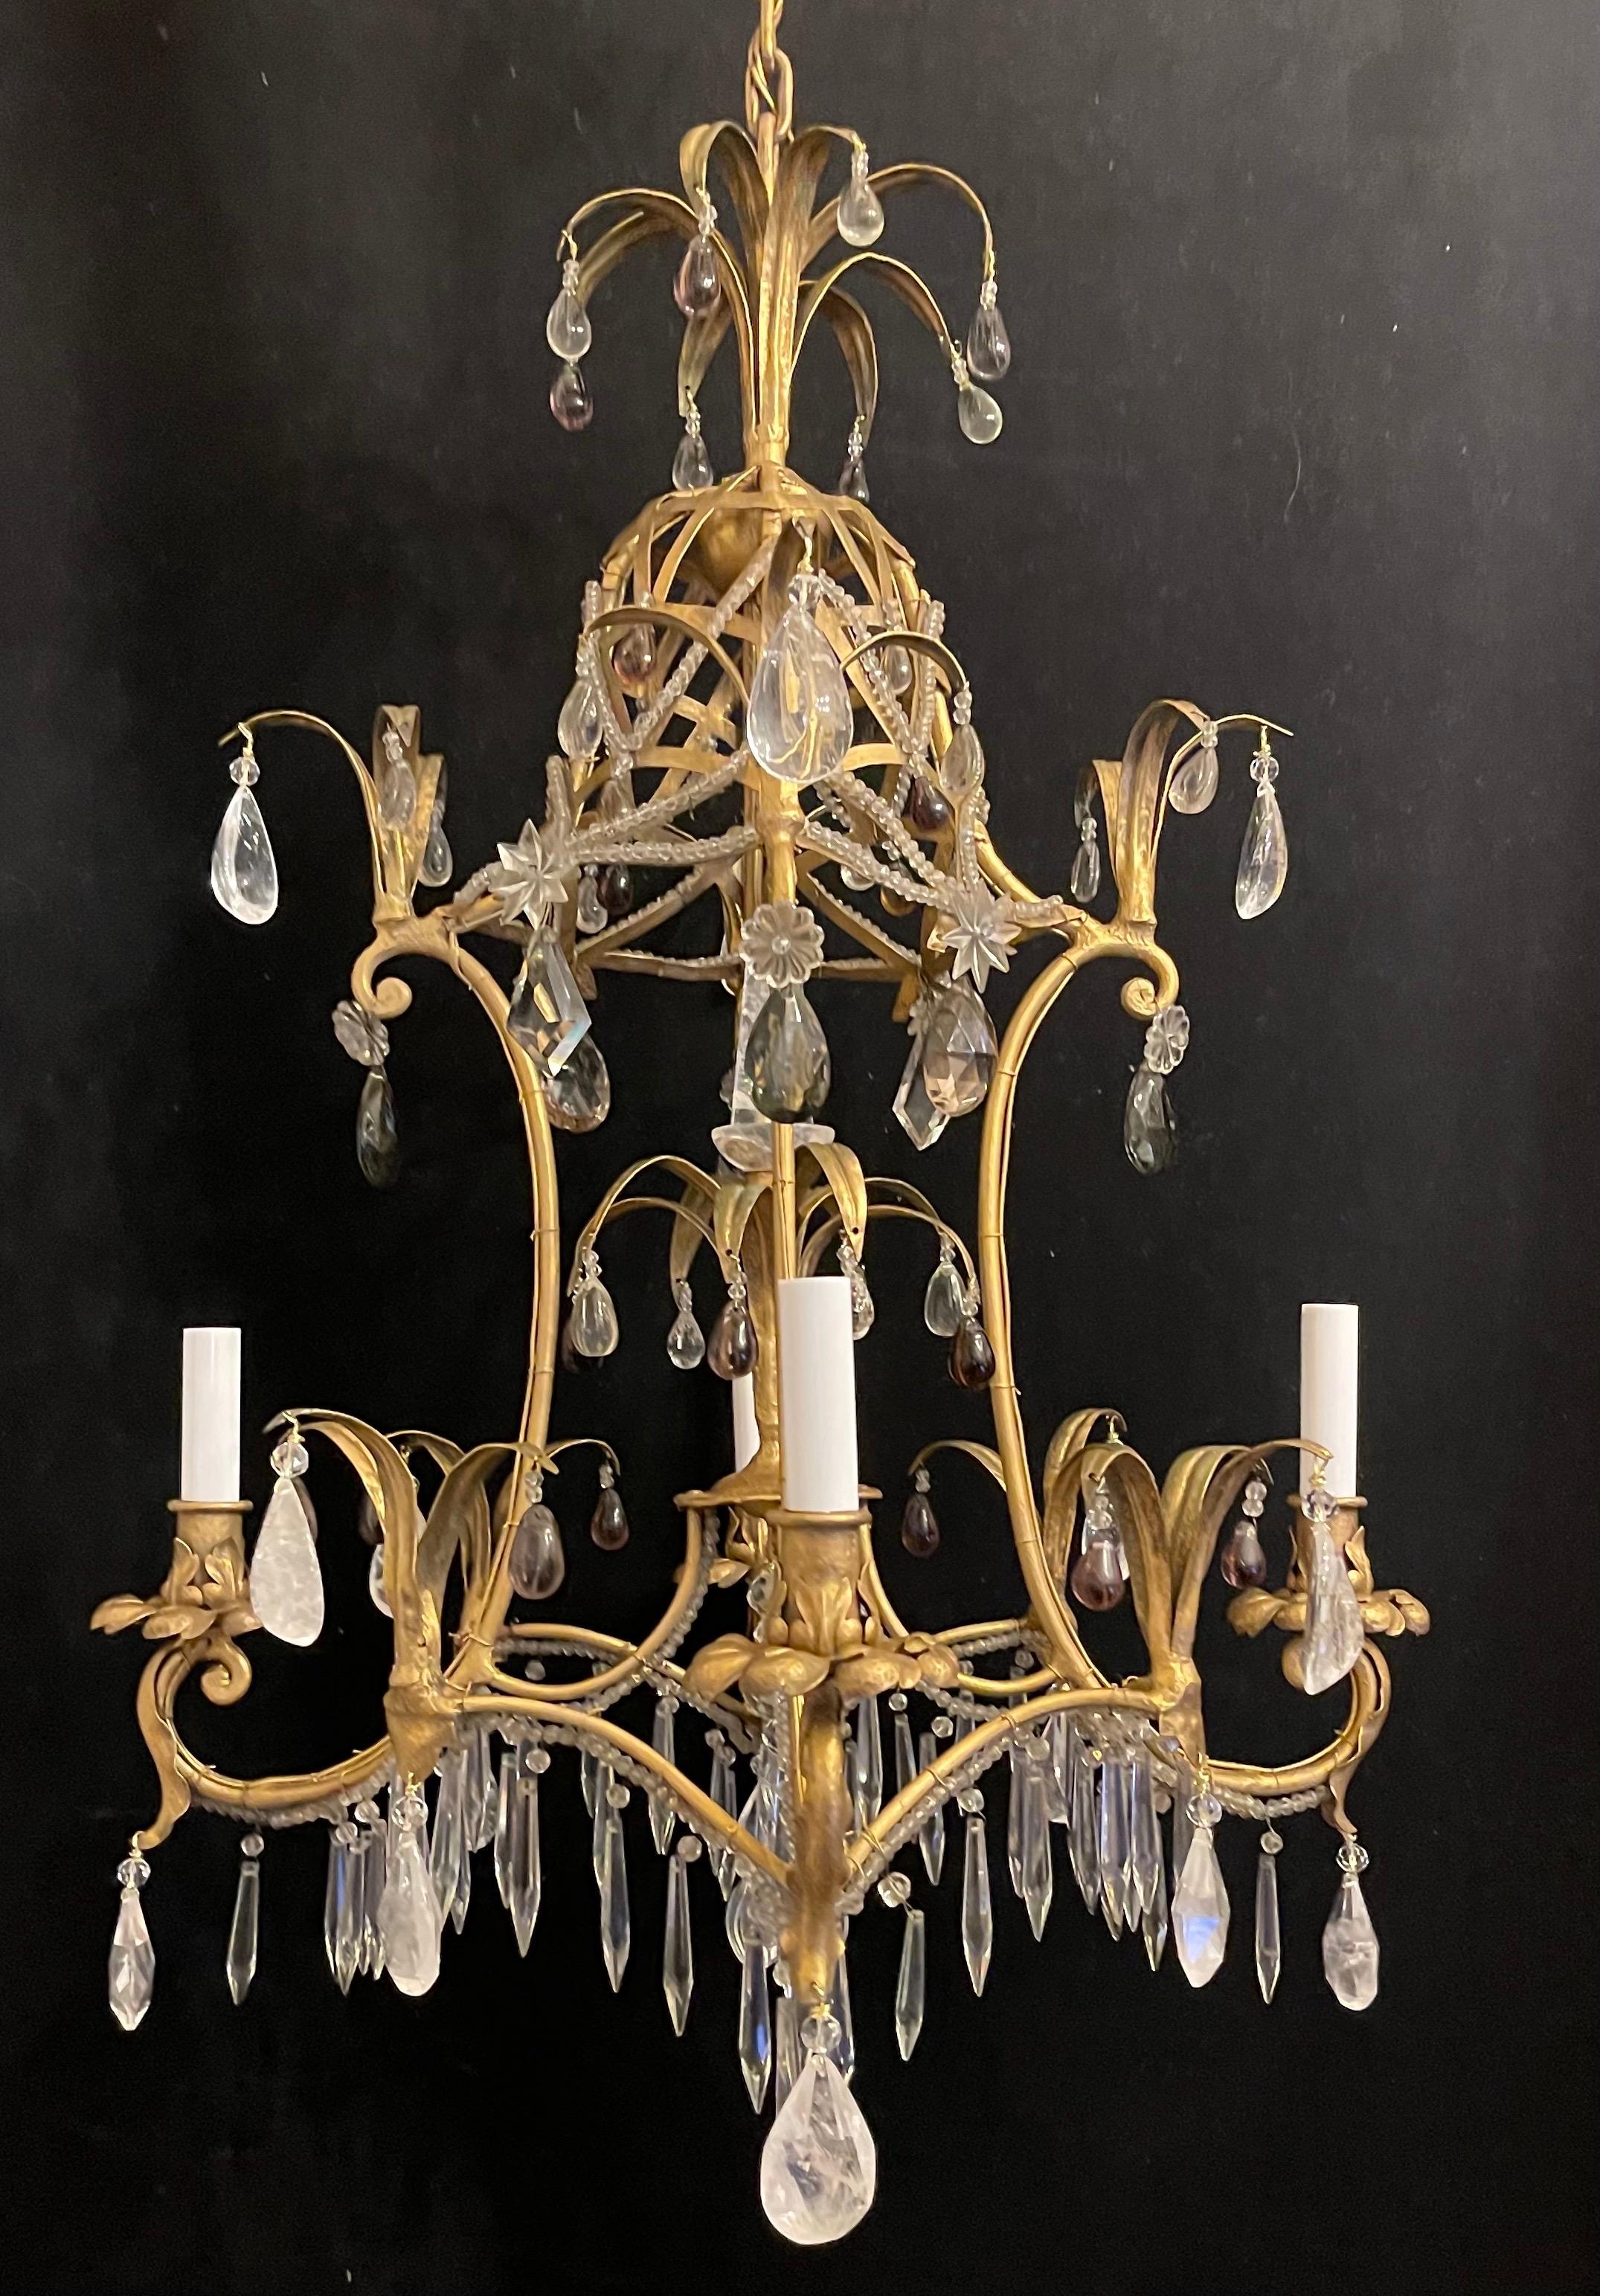 A wonderful Maison Bagues style basket gilt with rock crystal, amethyst & beading in a pagoda form 4 candelabra light chandelier
This fixture has been rewired and comes with chain canopy and mounting hardware for installation.